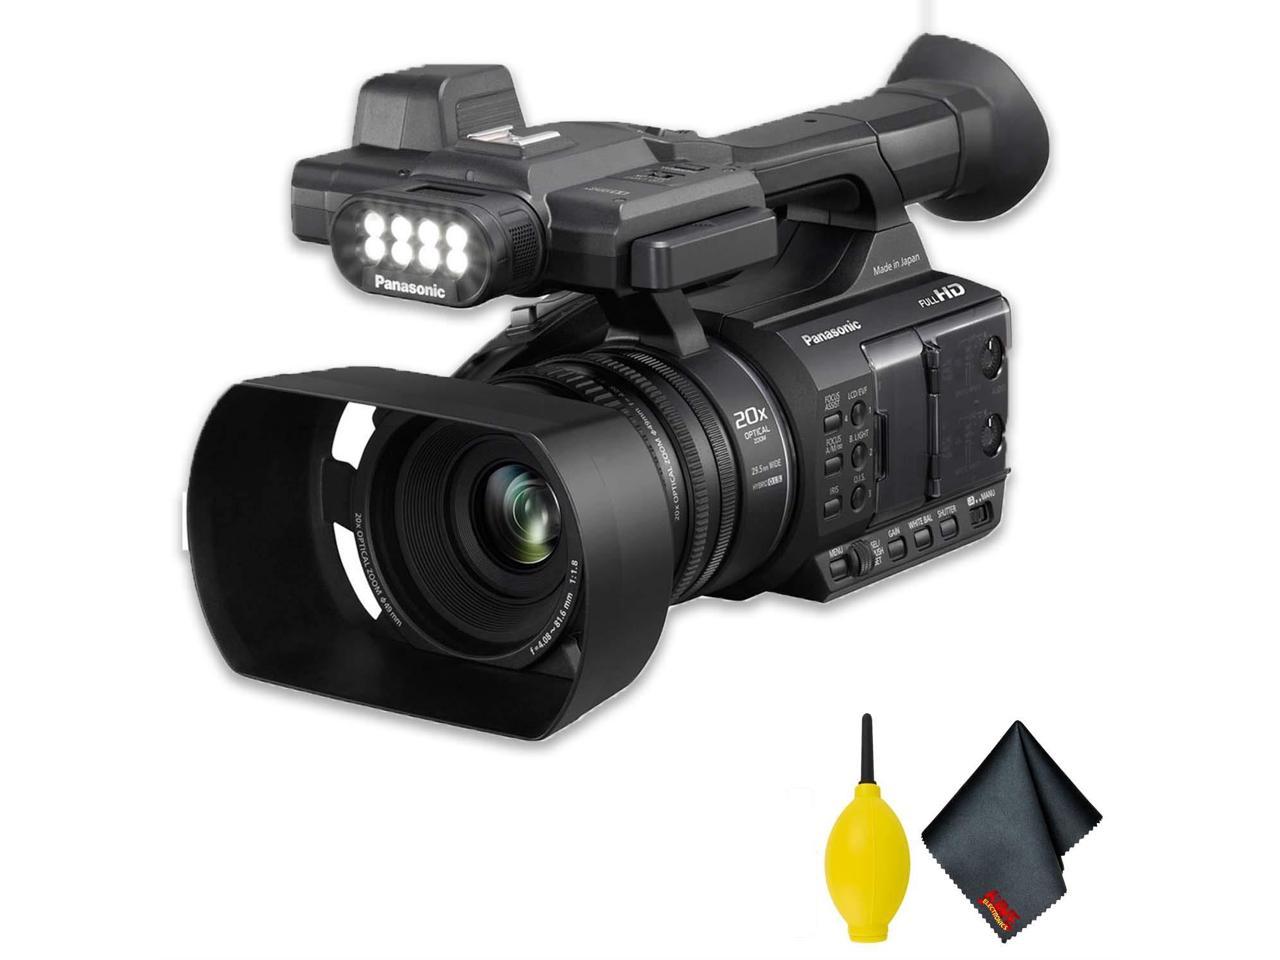 Panasonic� AG-AC30 Full HD Camcorder with Touch Panel LCD Viewscreen and Built-In LED Light� Basic Accessory Bundle